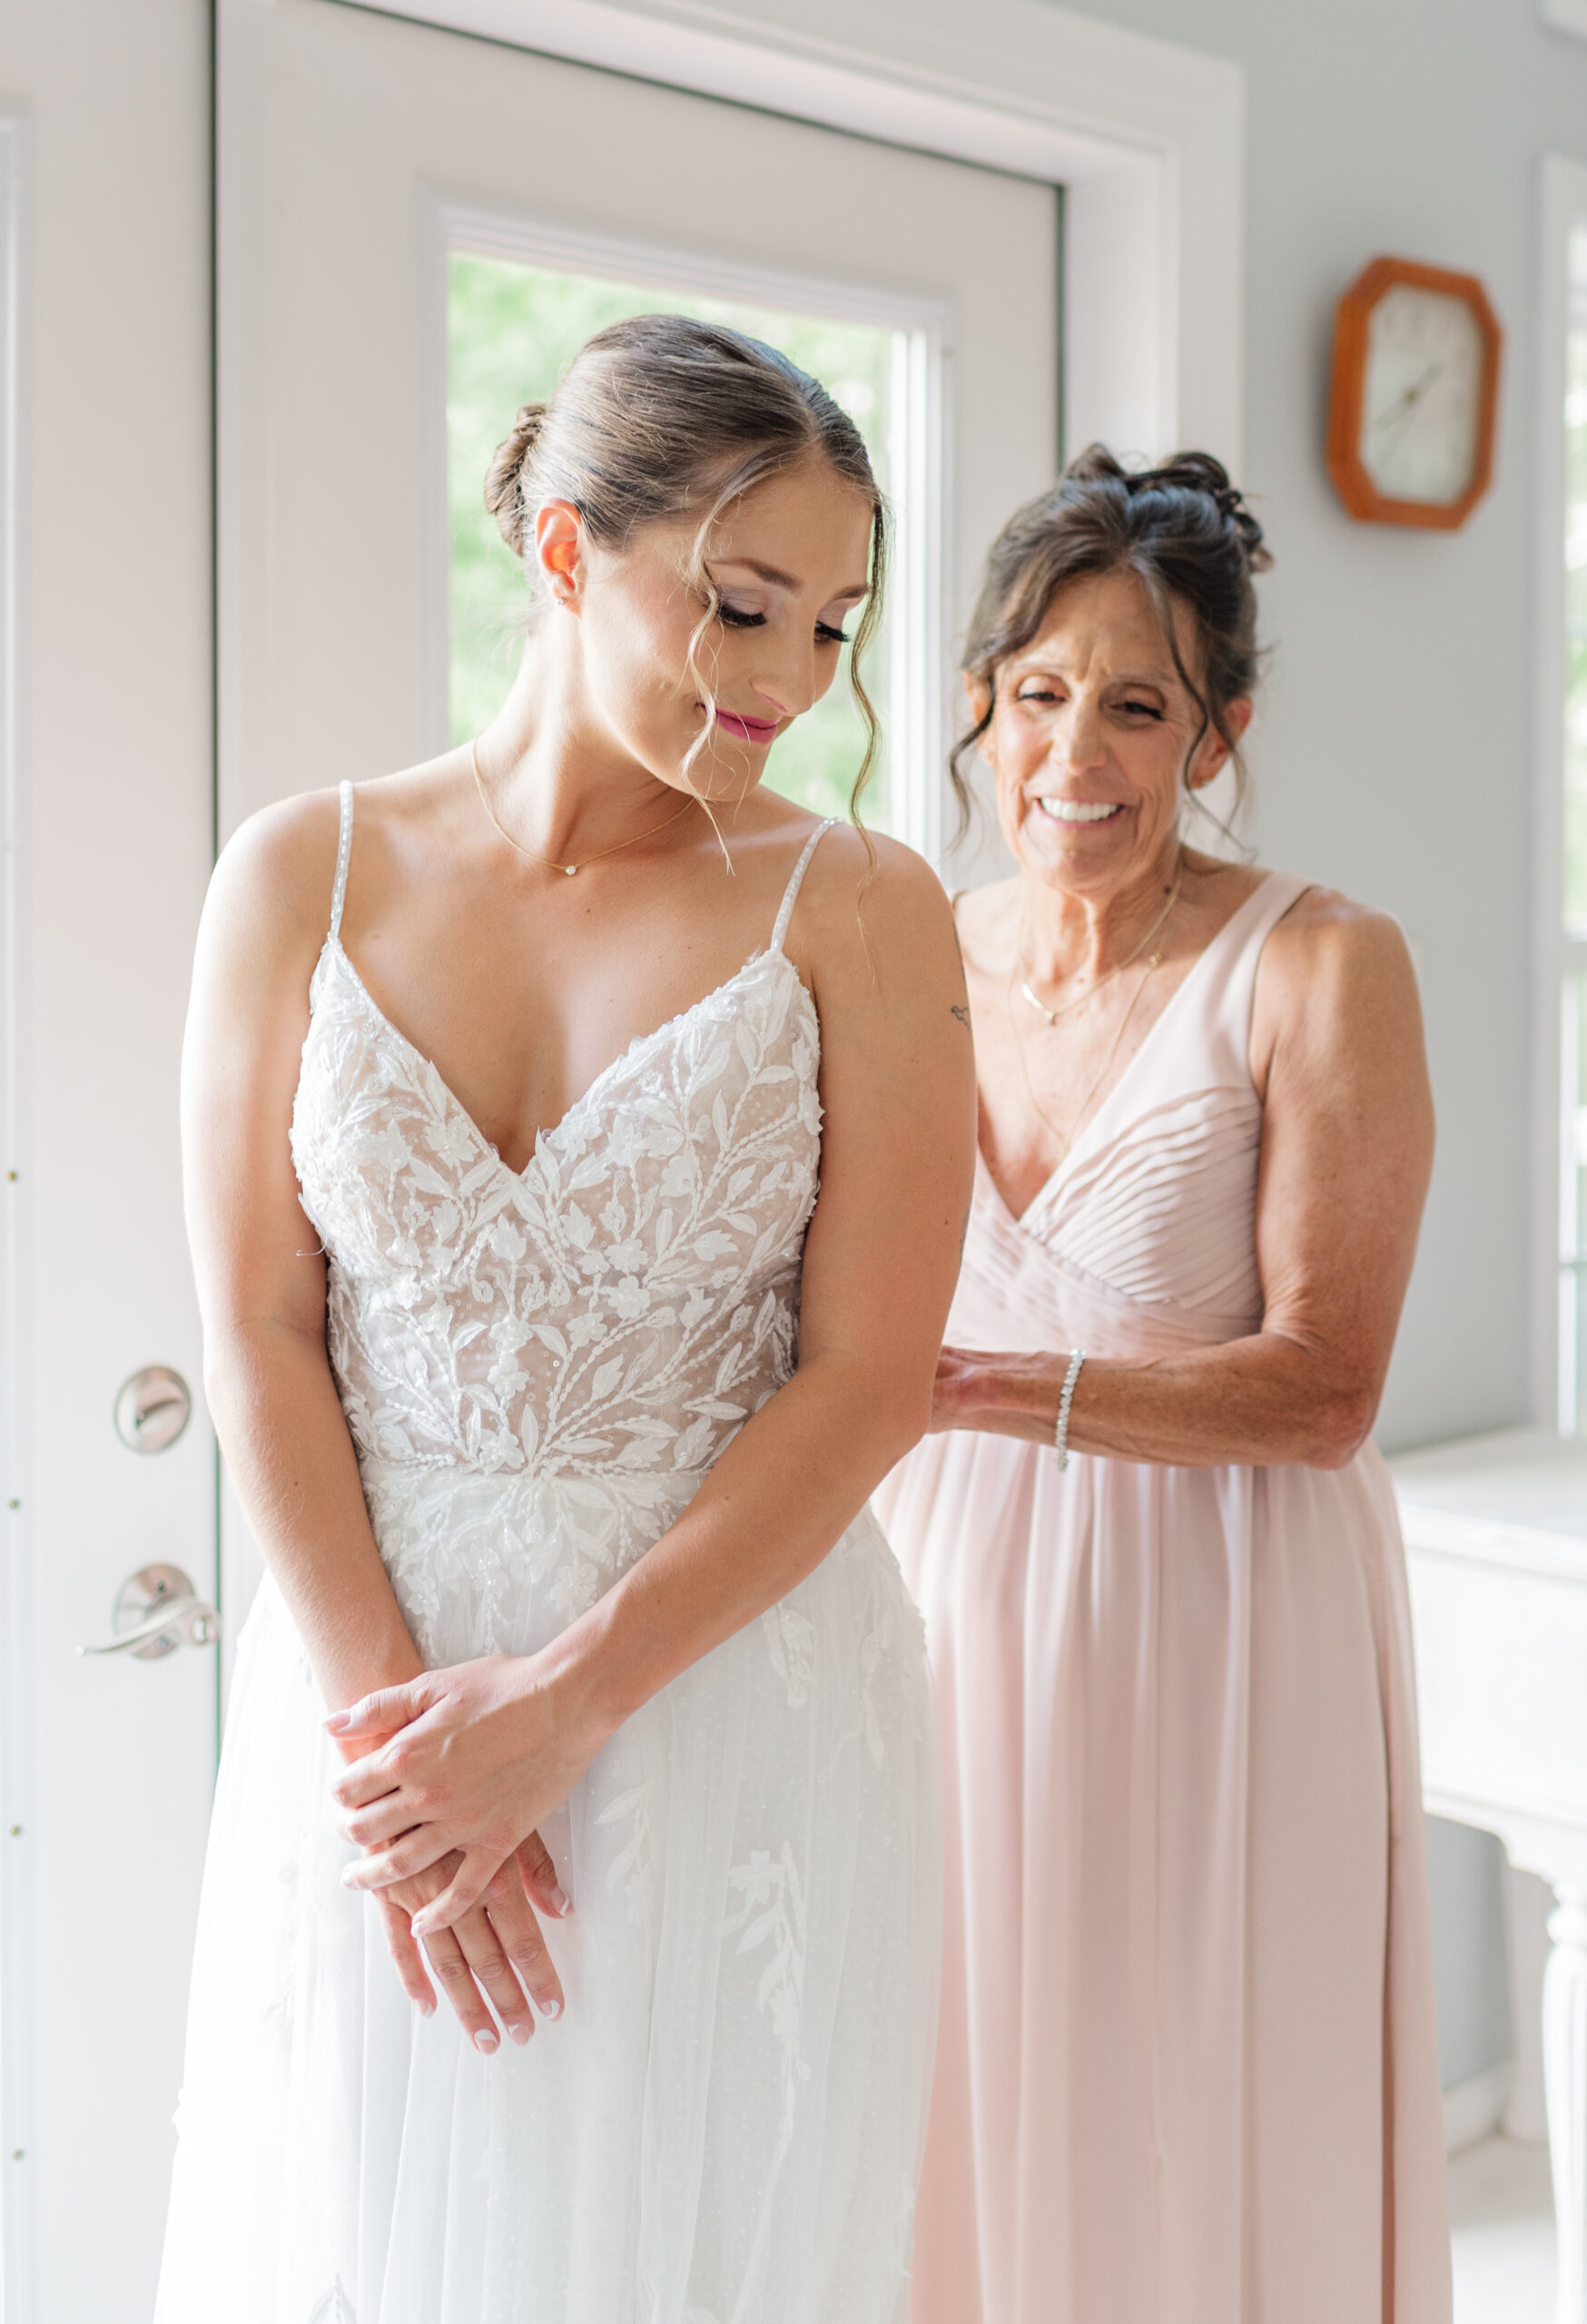 Mother and daughter on wedding day 